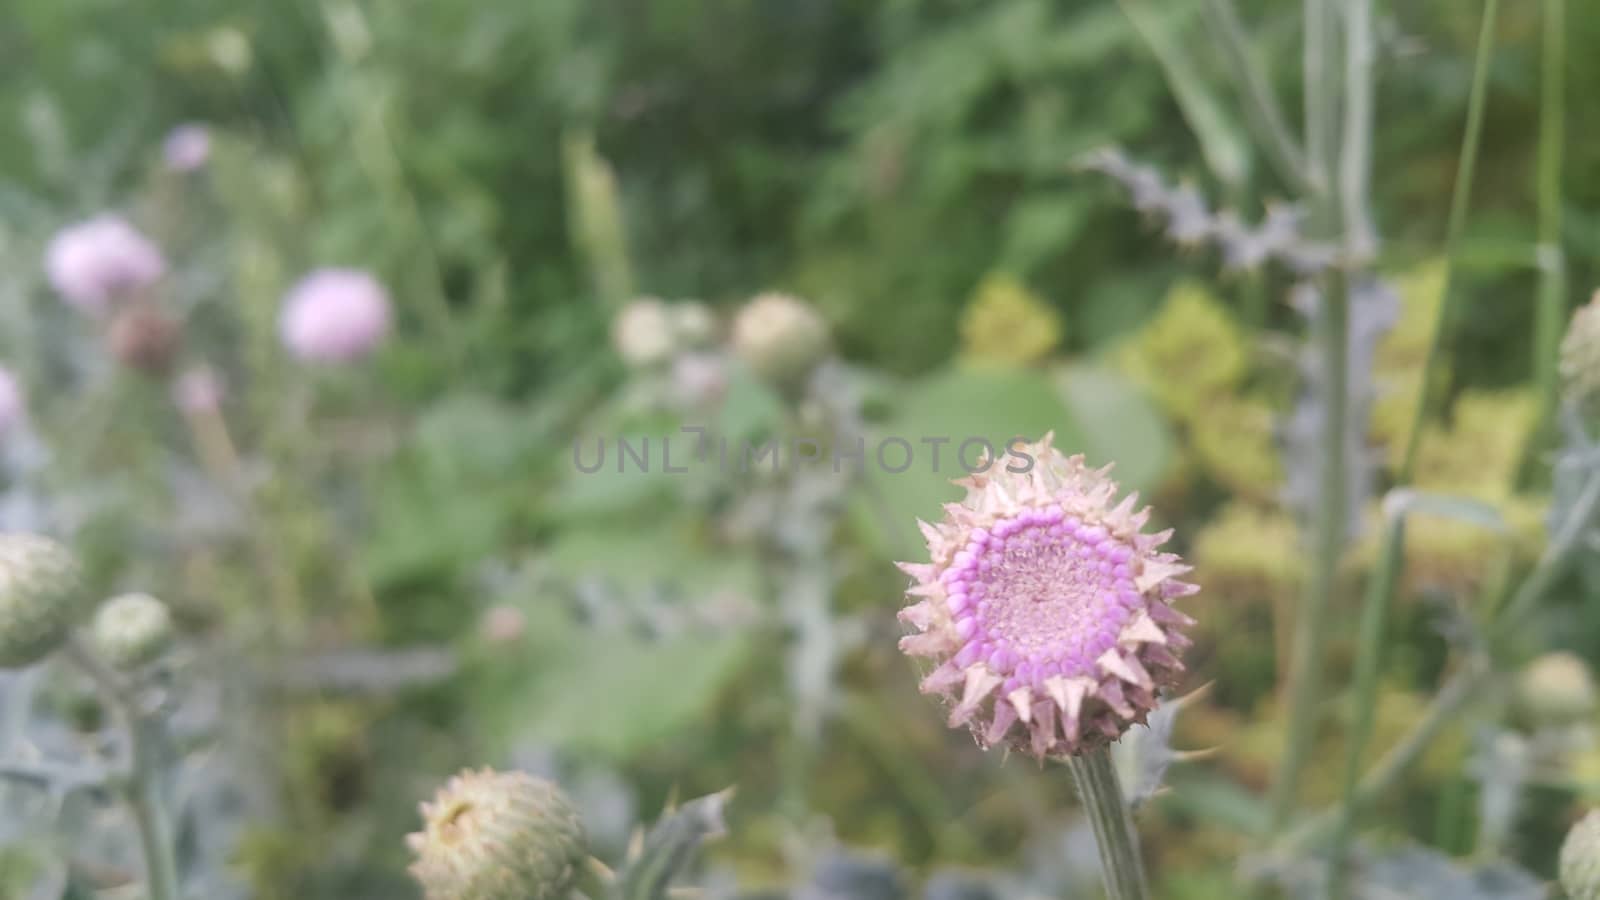 Perennial thistle plant with spine tipped triangular leaves and purple flower heads surrounded by spiny bracts. Cirsium verutum thistle also known as Cirsium involucratum.